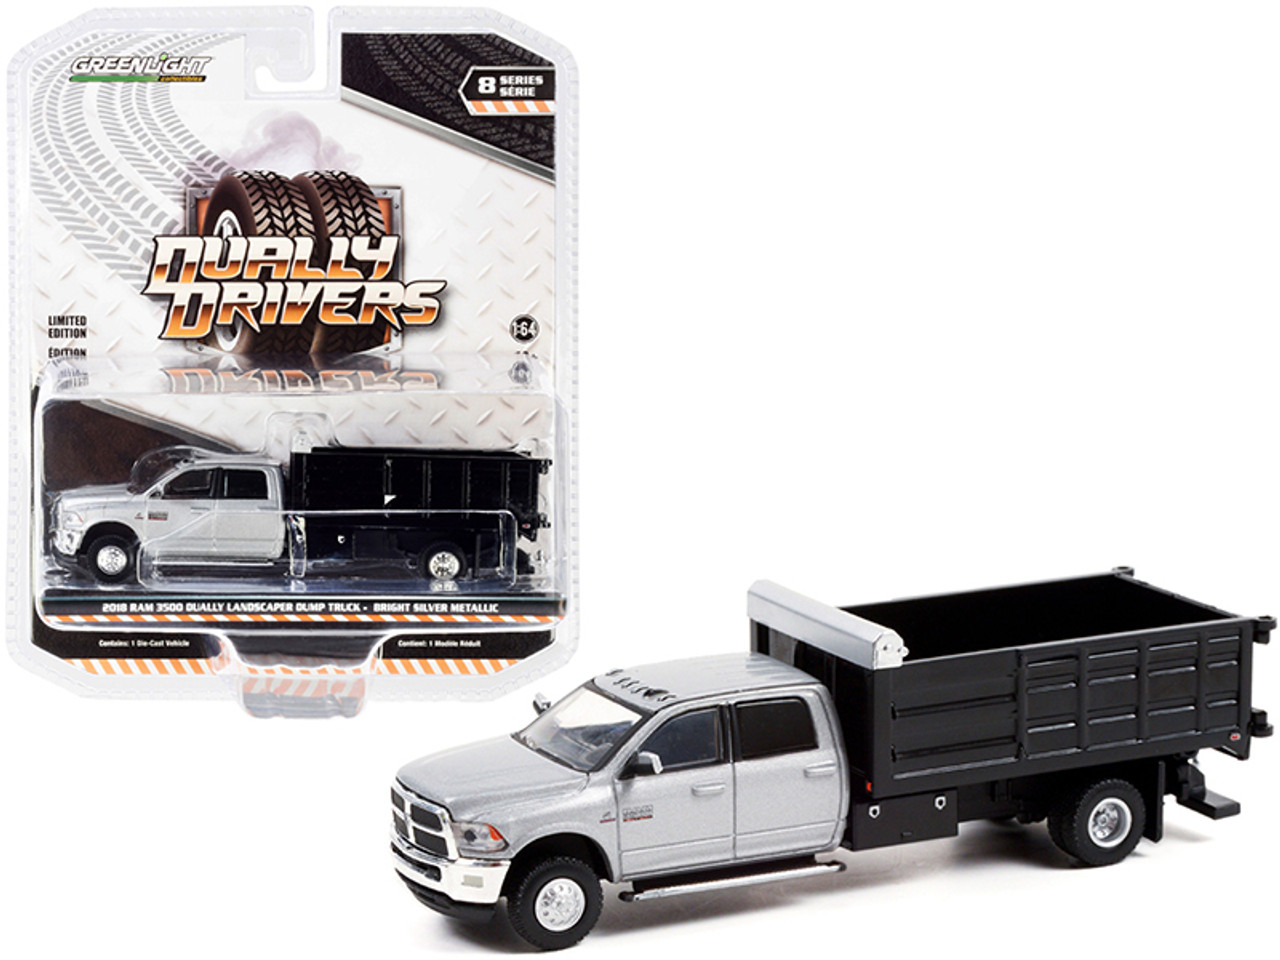 2018 Dodge Ram 3500 Dually Landscaper Dump Truck Bright Silver Metallic and Black "Dually Drivers" Series 8 1/64 Diecast Model Car by Greenlight